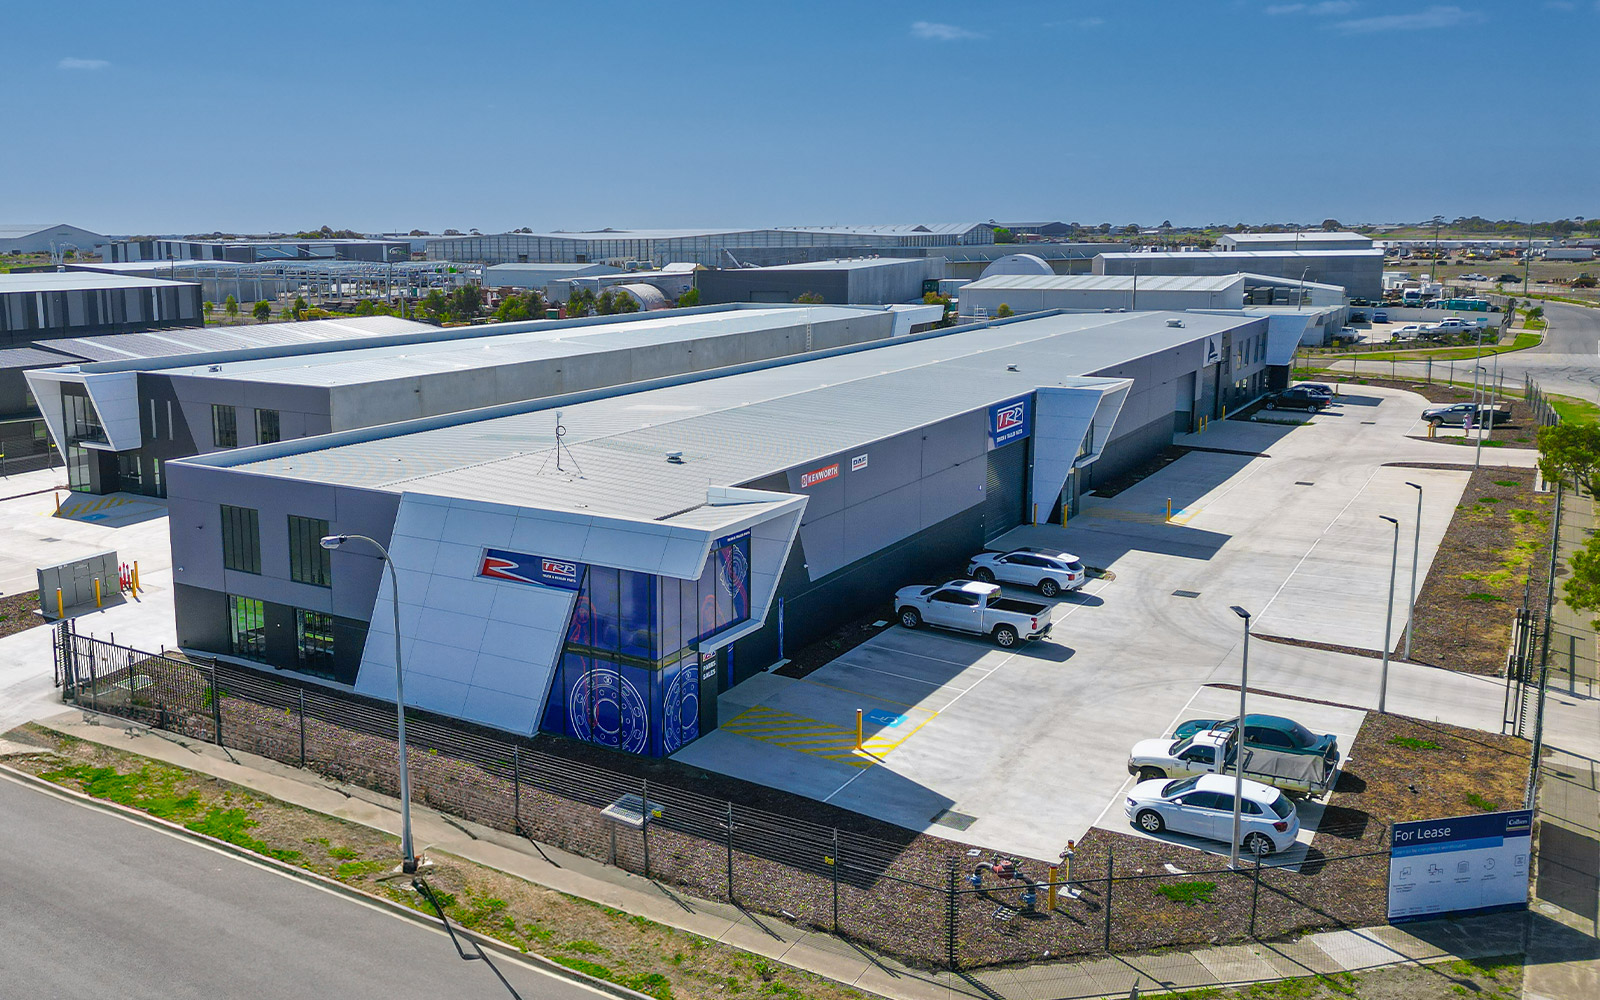 Nicholson Construction multi tenant factory and office complex